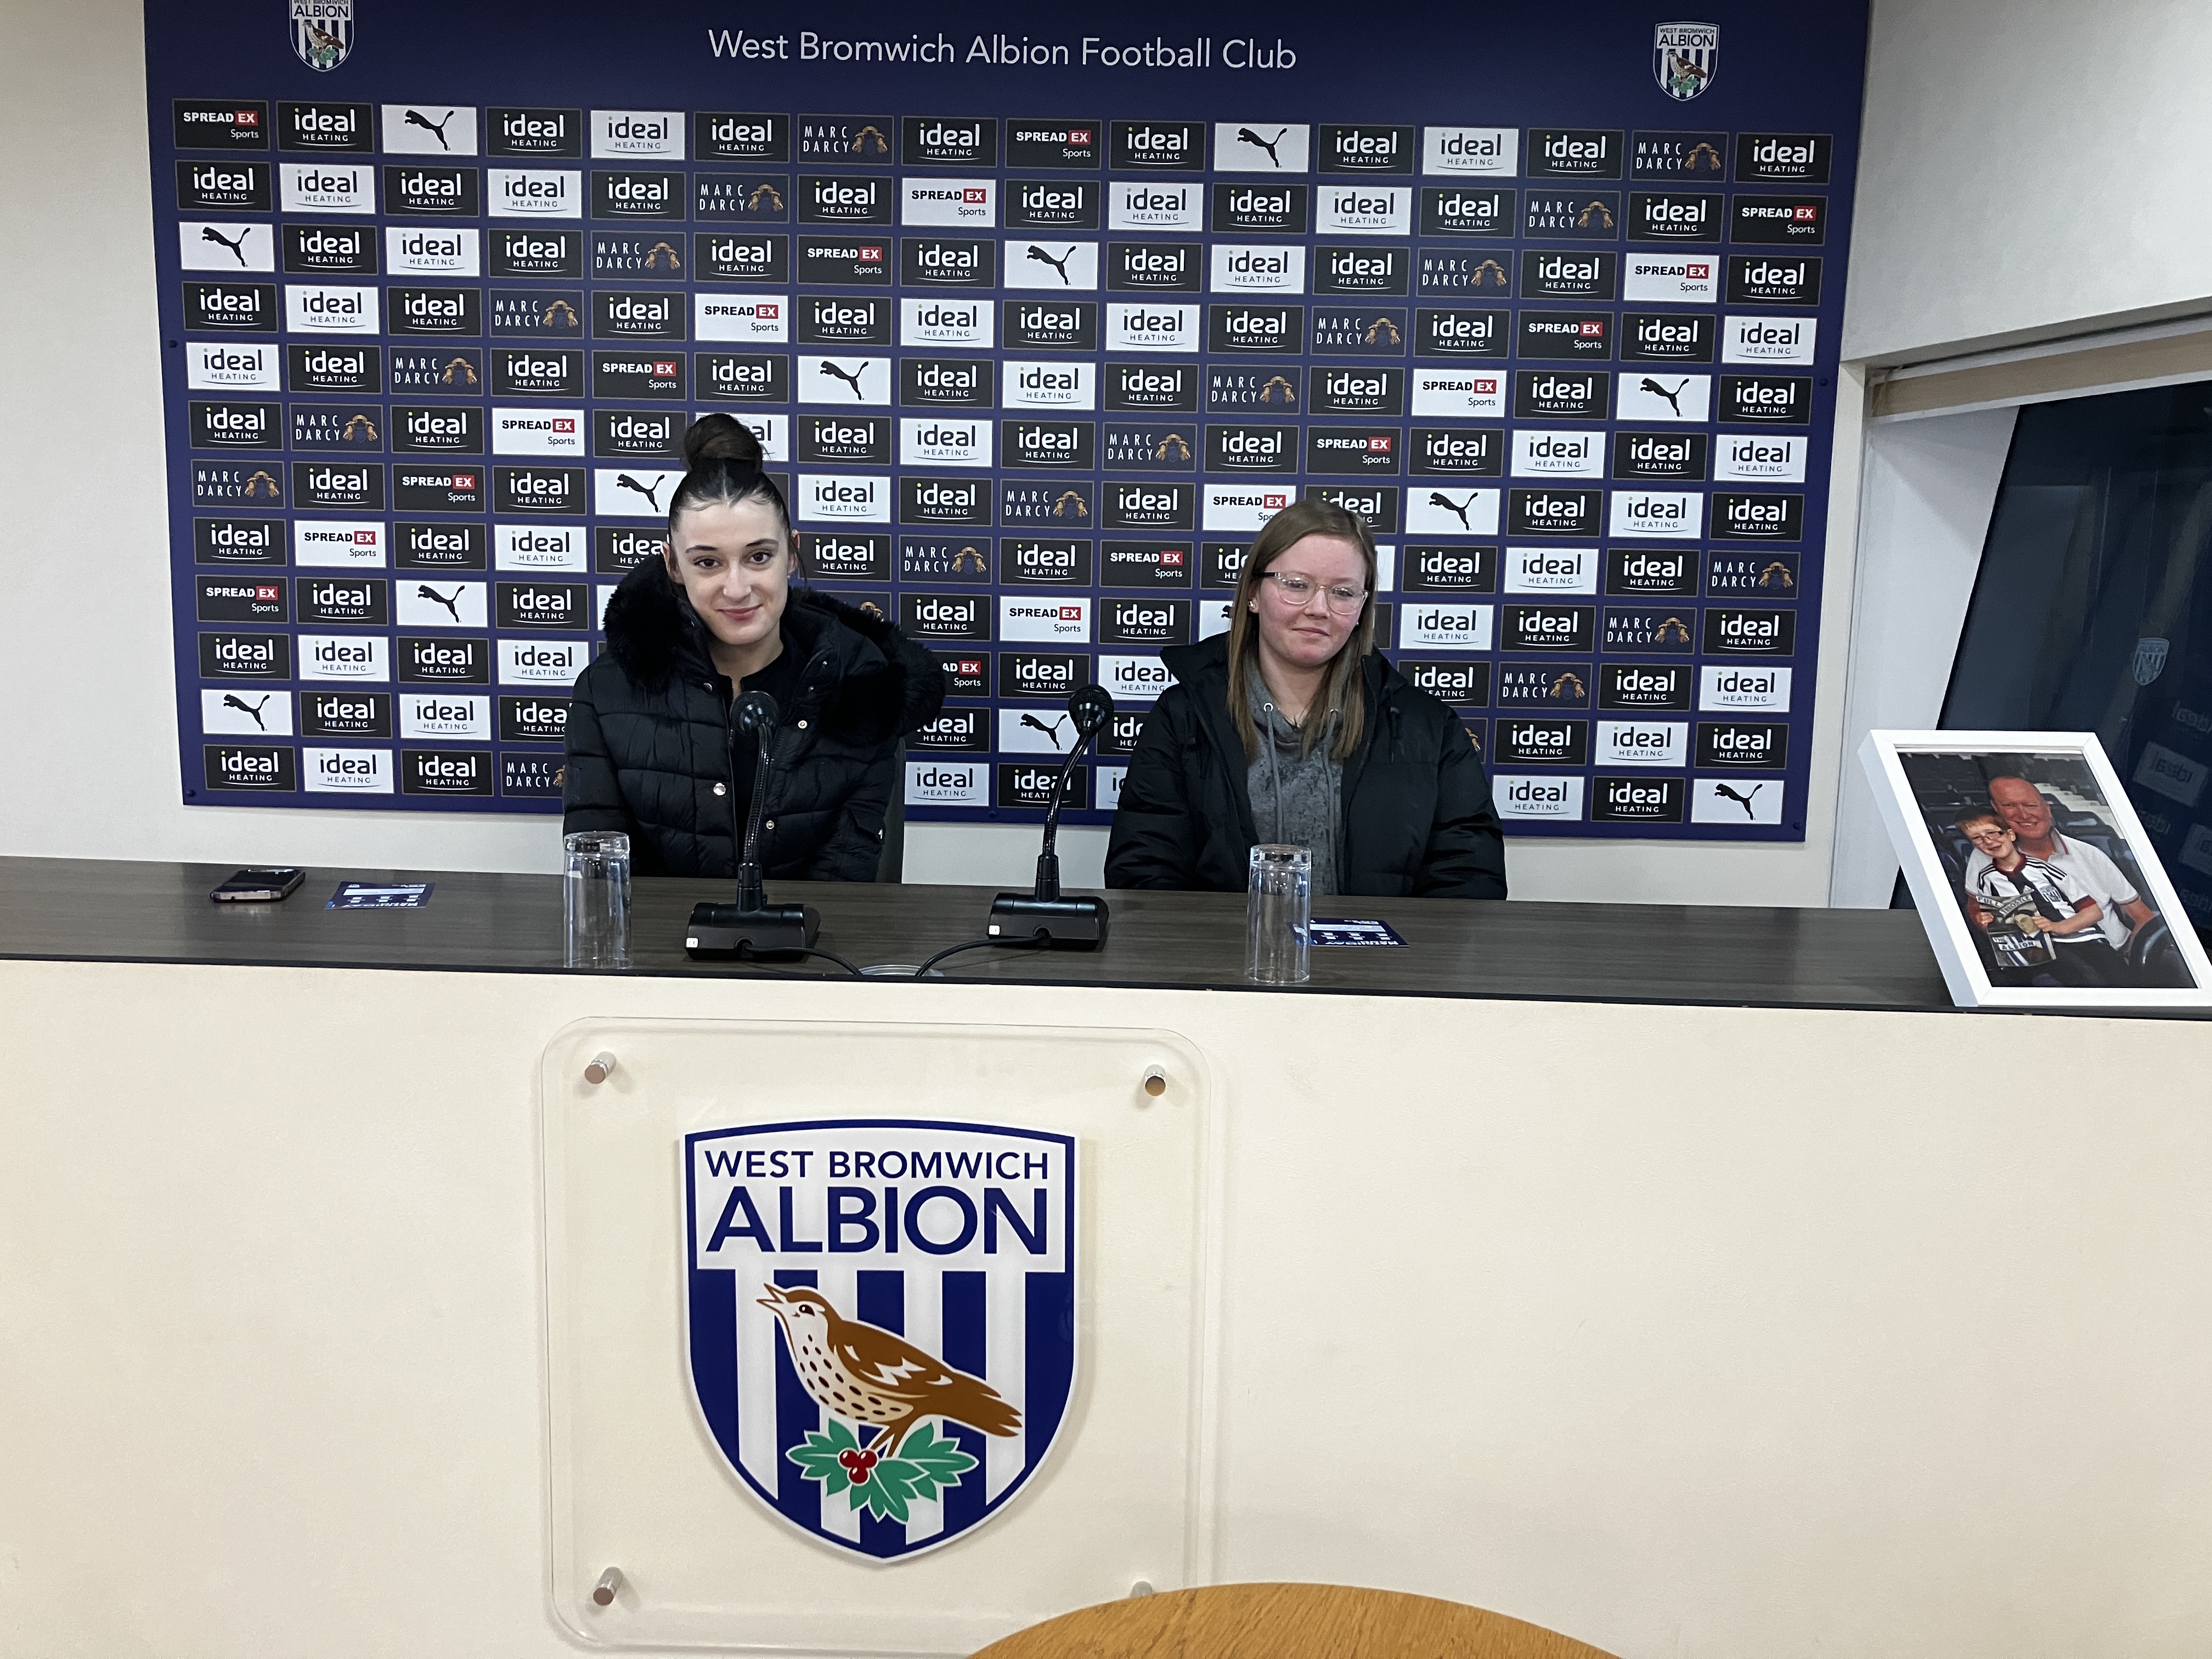 Supporter to Reporter participants in the Albion media suite